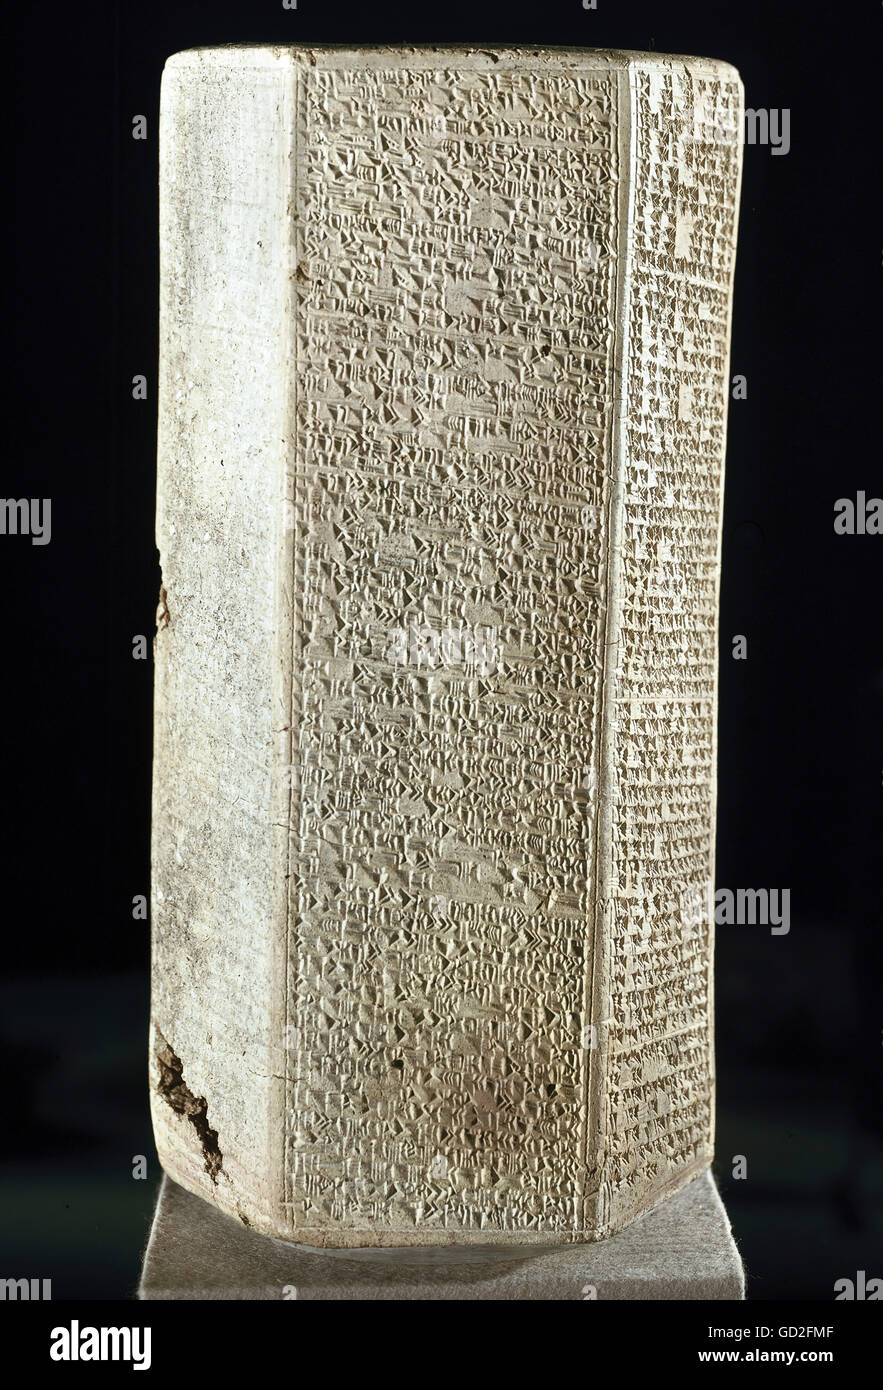 writing, script, wedge writing, Assyria, prism with inscription of the King Assur-ahhe-iddina about his military campaigns, Nineveh, clay, 676 BC, National Museum Baghdad, Iraq, Assur ahhe iddina, Esarhaddon, Assyrian, Assyrian empire, campaign, campaigns, war, wars, document, documents, report, reports, deed report, Mesopotamia, stone, stones, 7th century BC, ancient world, ancient times, historic, historical, ancient world, Additional-Rights-Clearences-Not Available Stock Photo